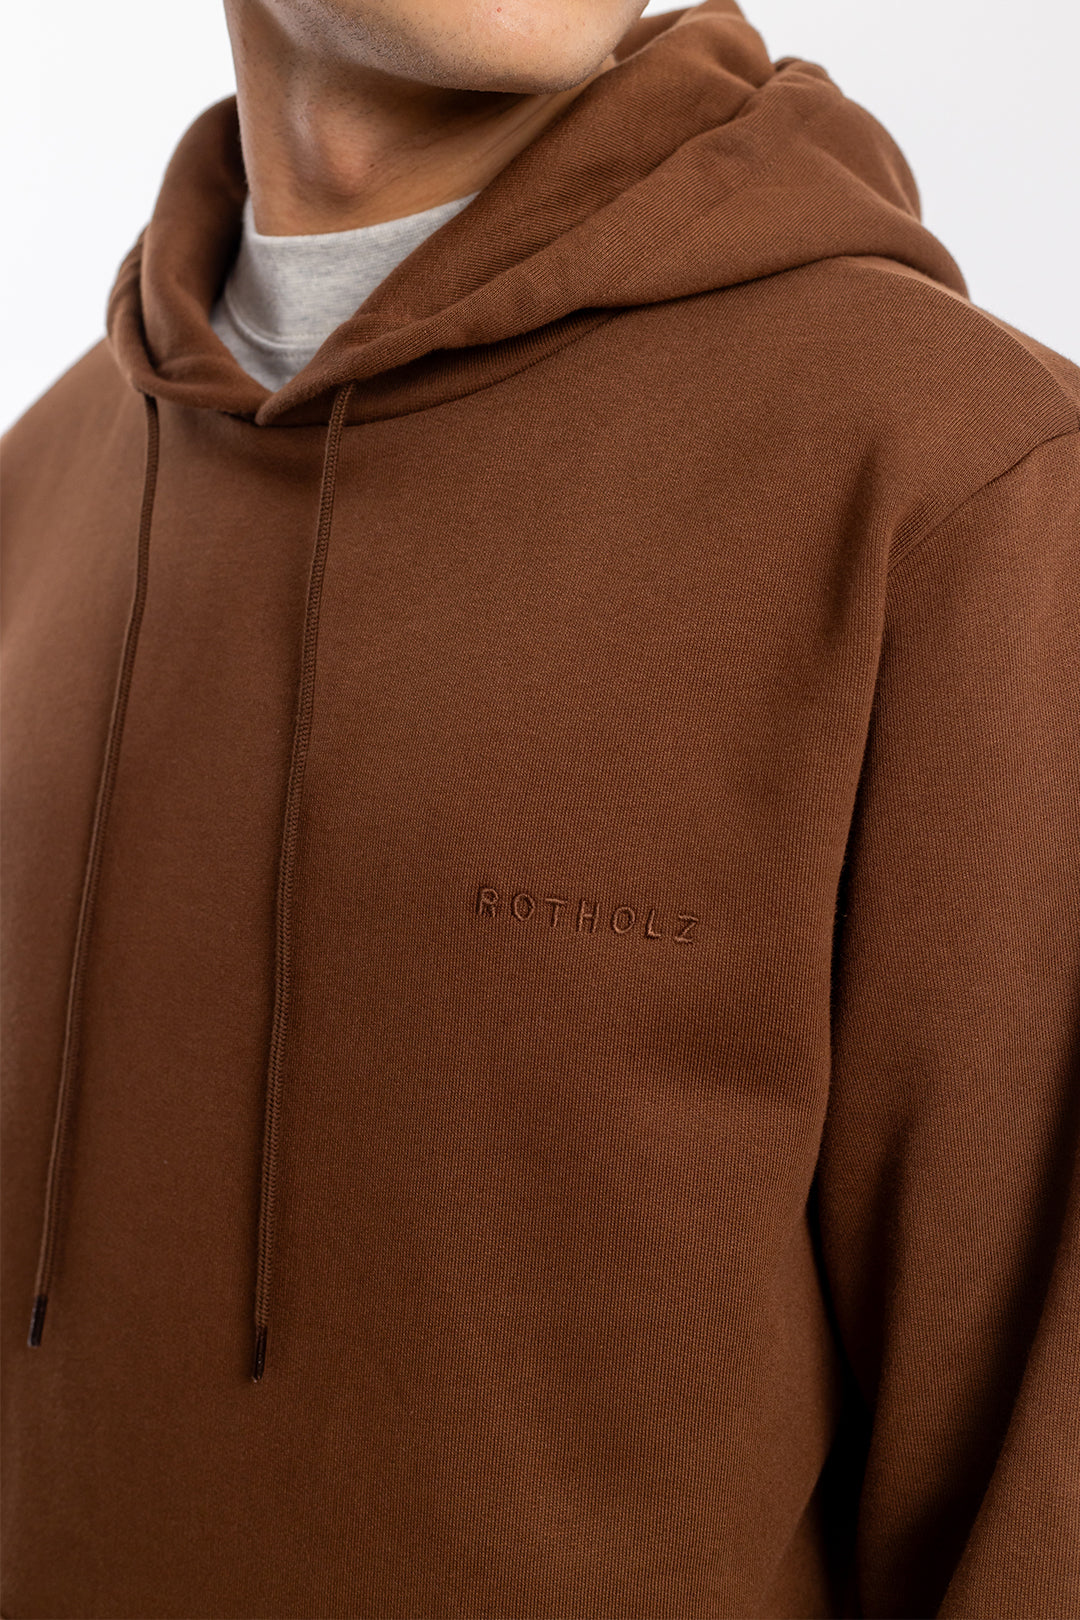 Dark brown logo hoodie made of organic cotton by Rotholz